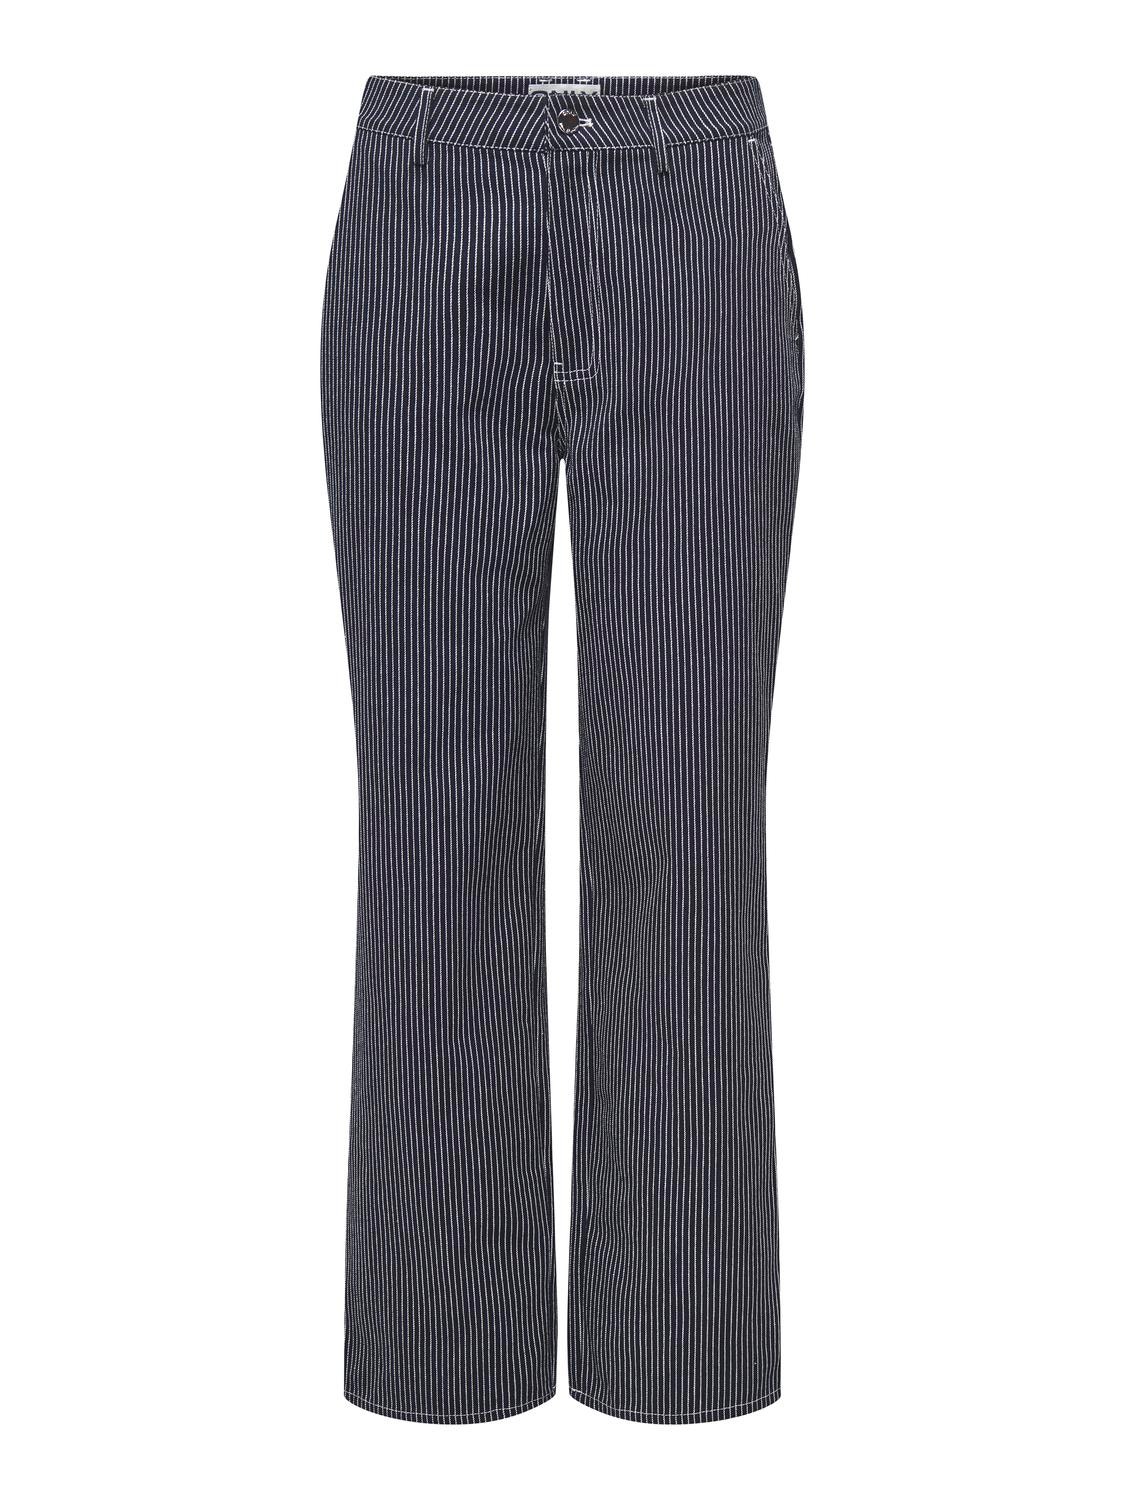 ONLY Striped pants with high waist -Night Sky - 15312896